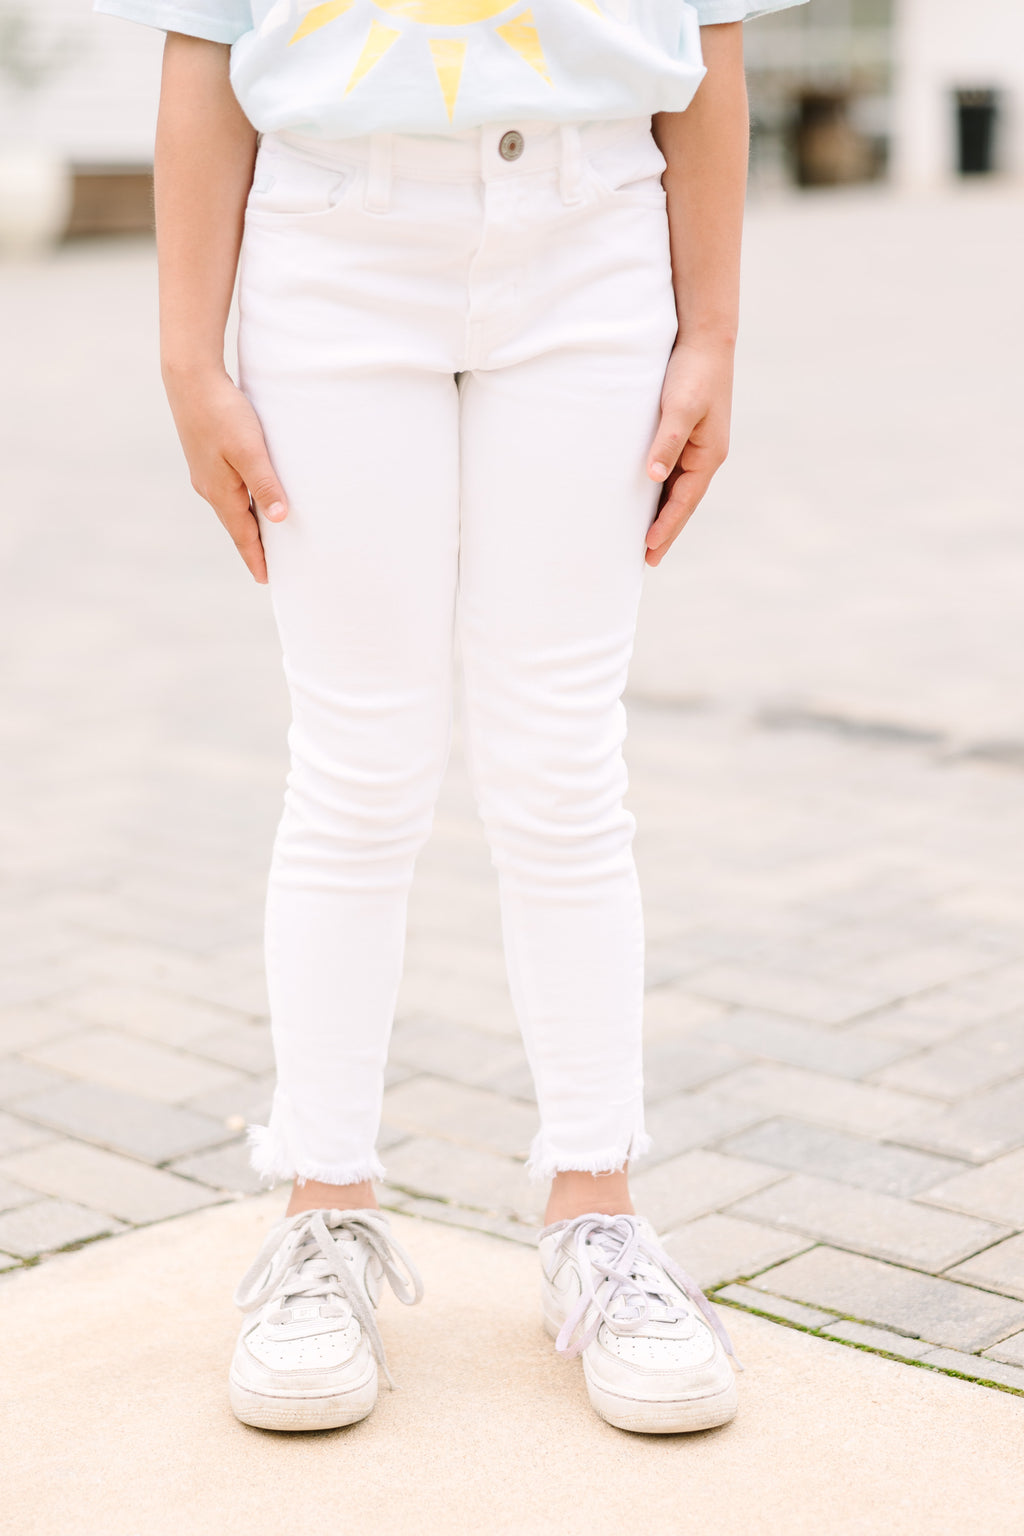 Girls KanCan: Look Into Your Heart Light Wash Flare Jeans – Shop the Mint